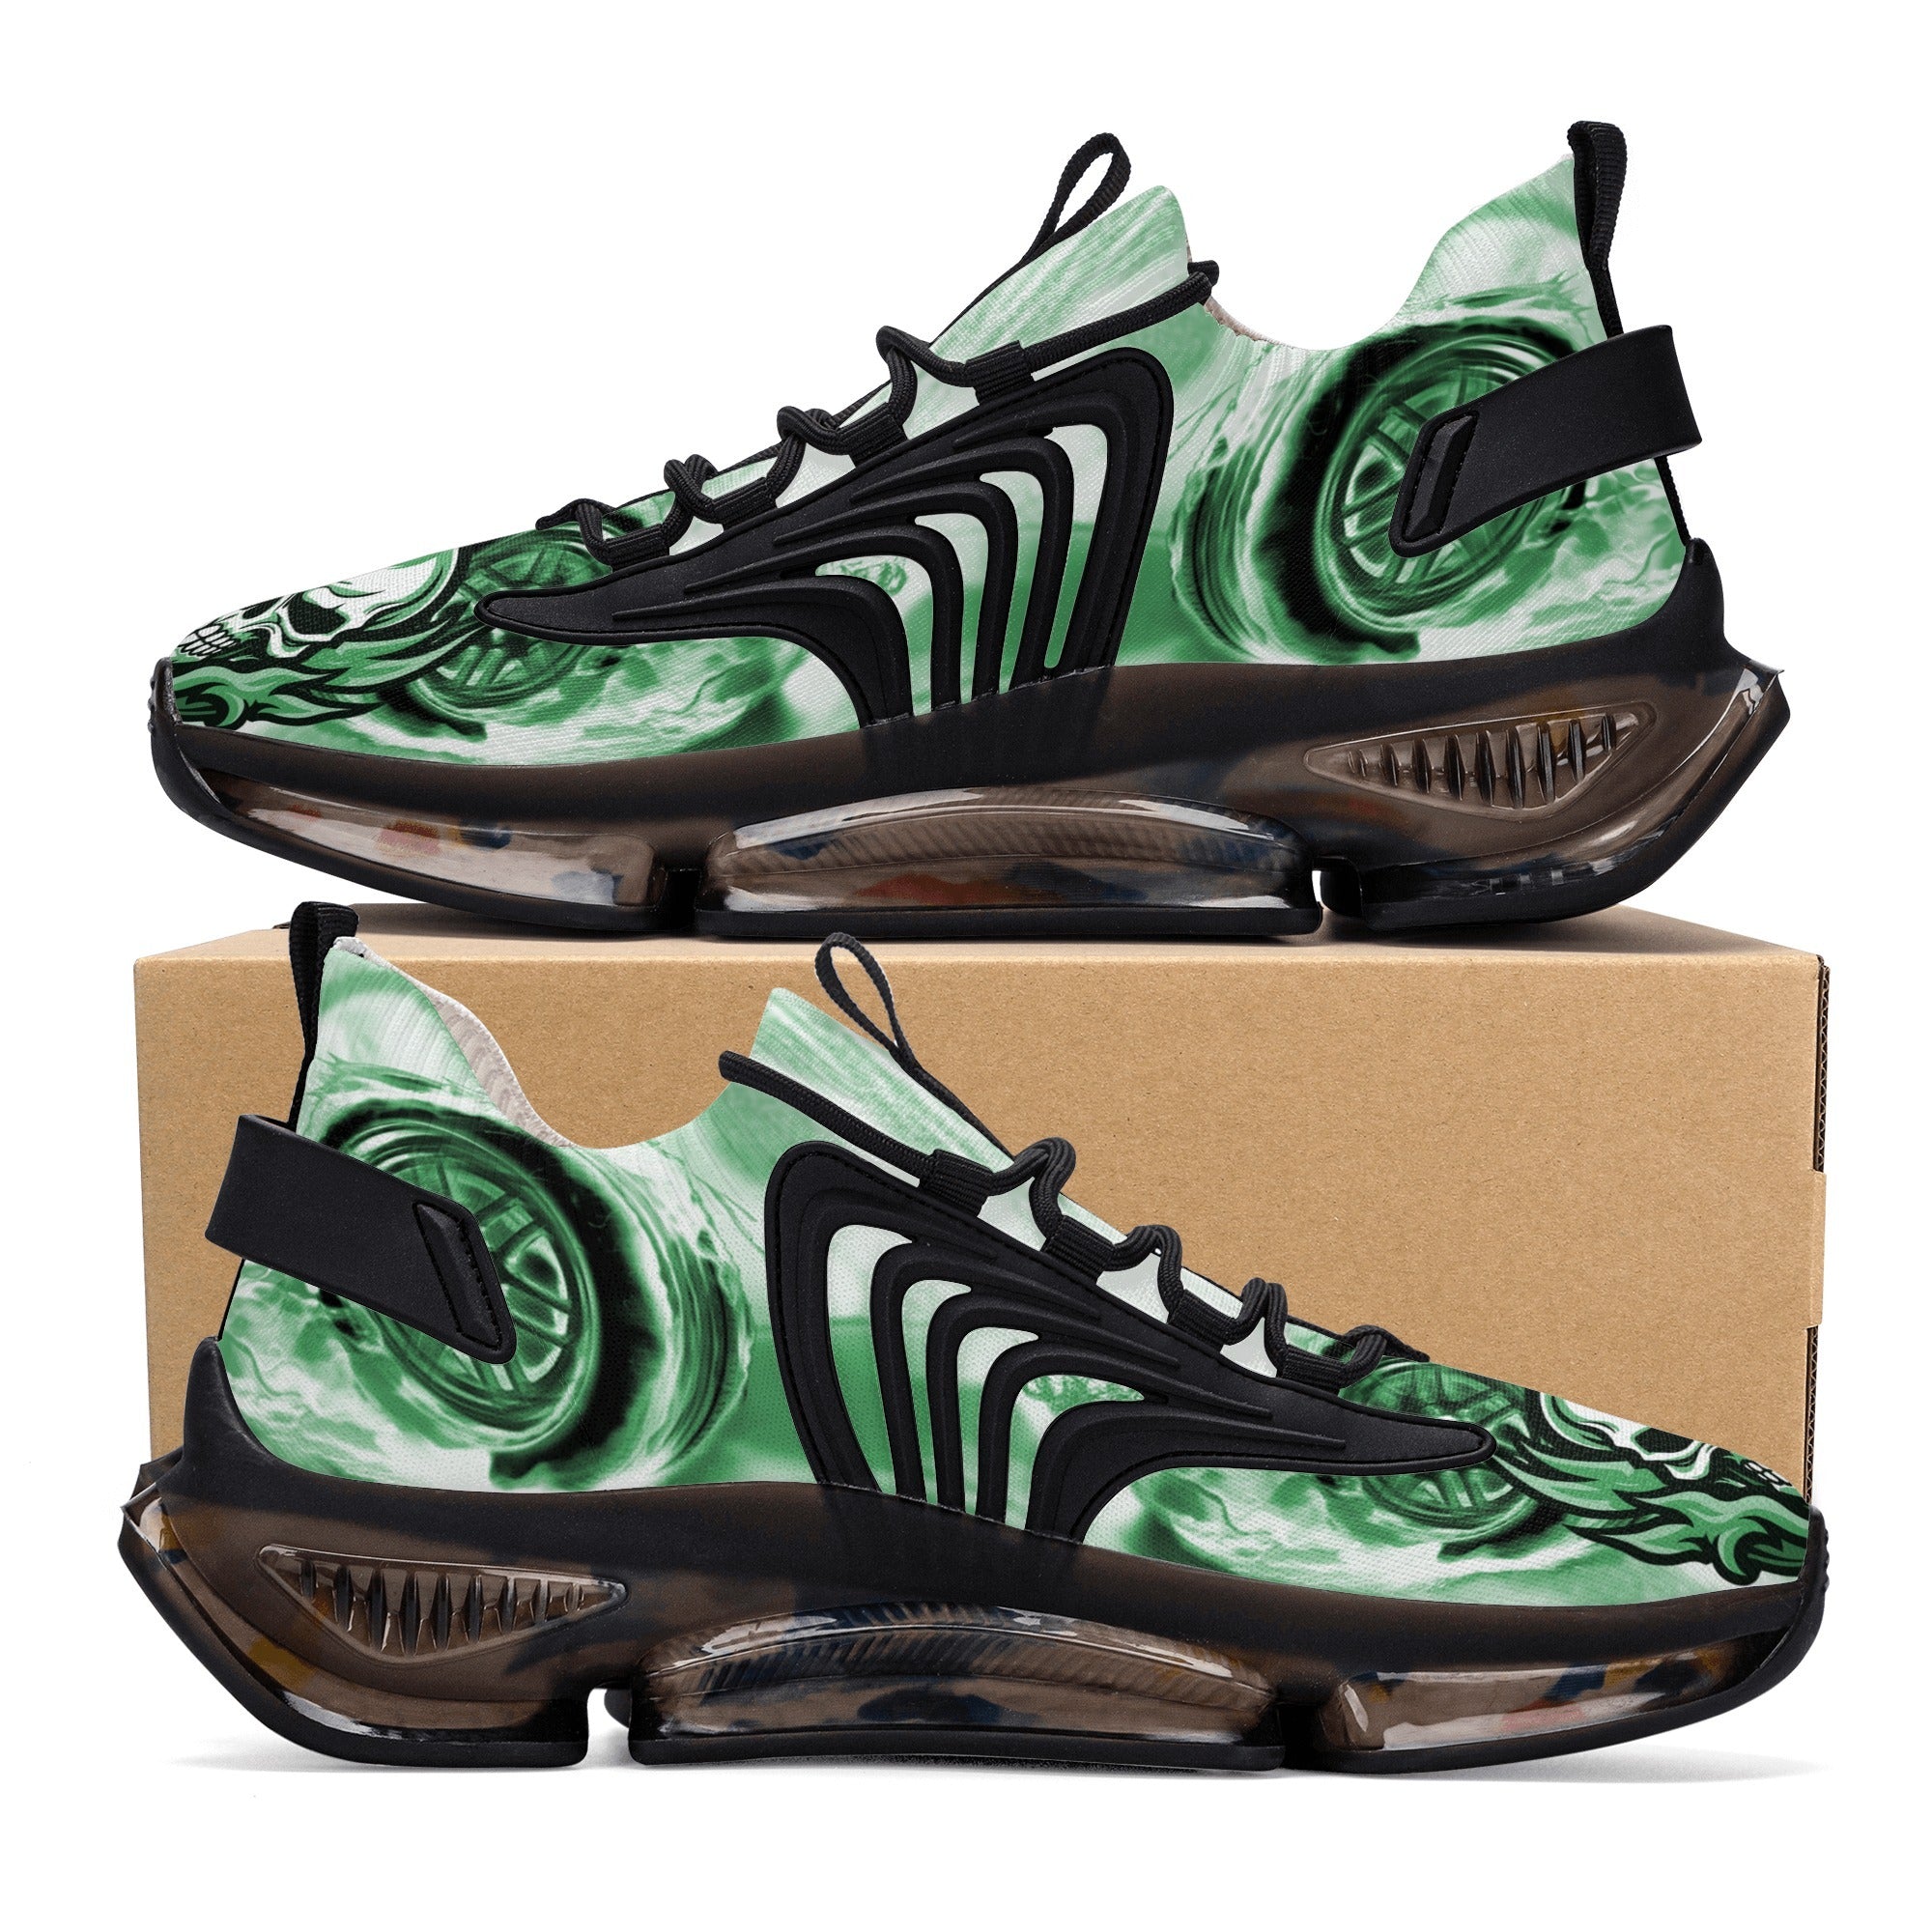    green-flaming-skull-flaming-wheels-best-womens-react-heel-running-shoes-comfort-style-inside-outside-view-heroicu-brand